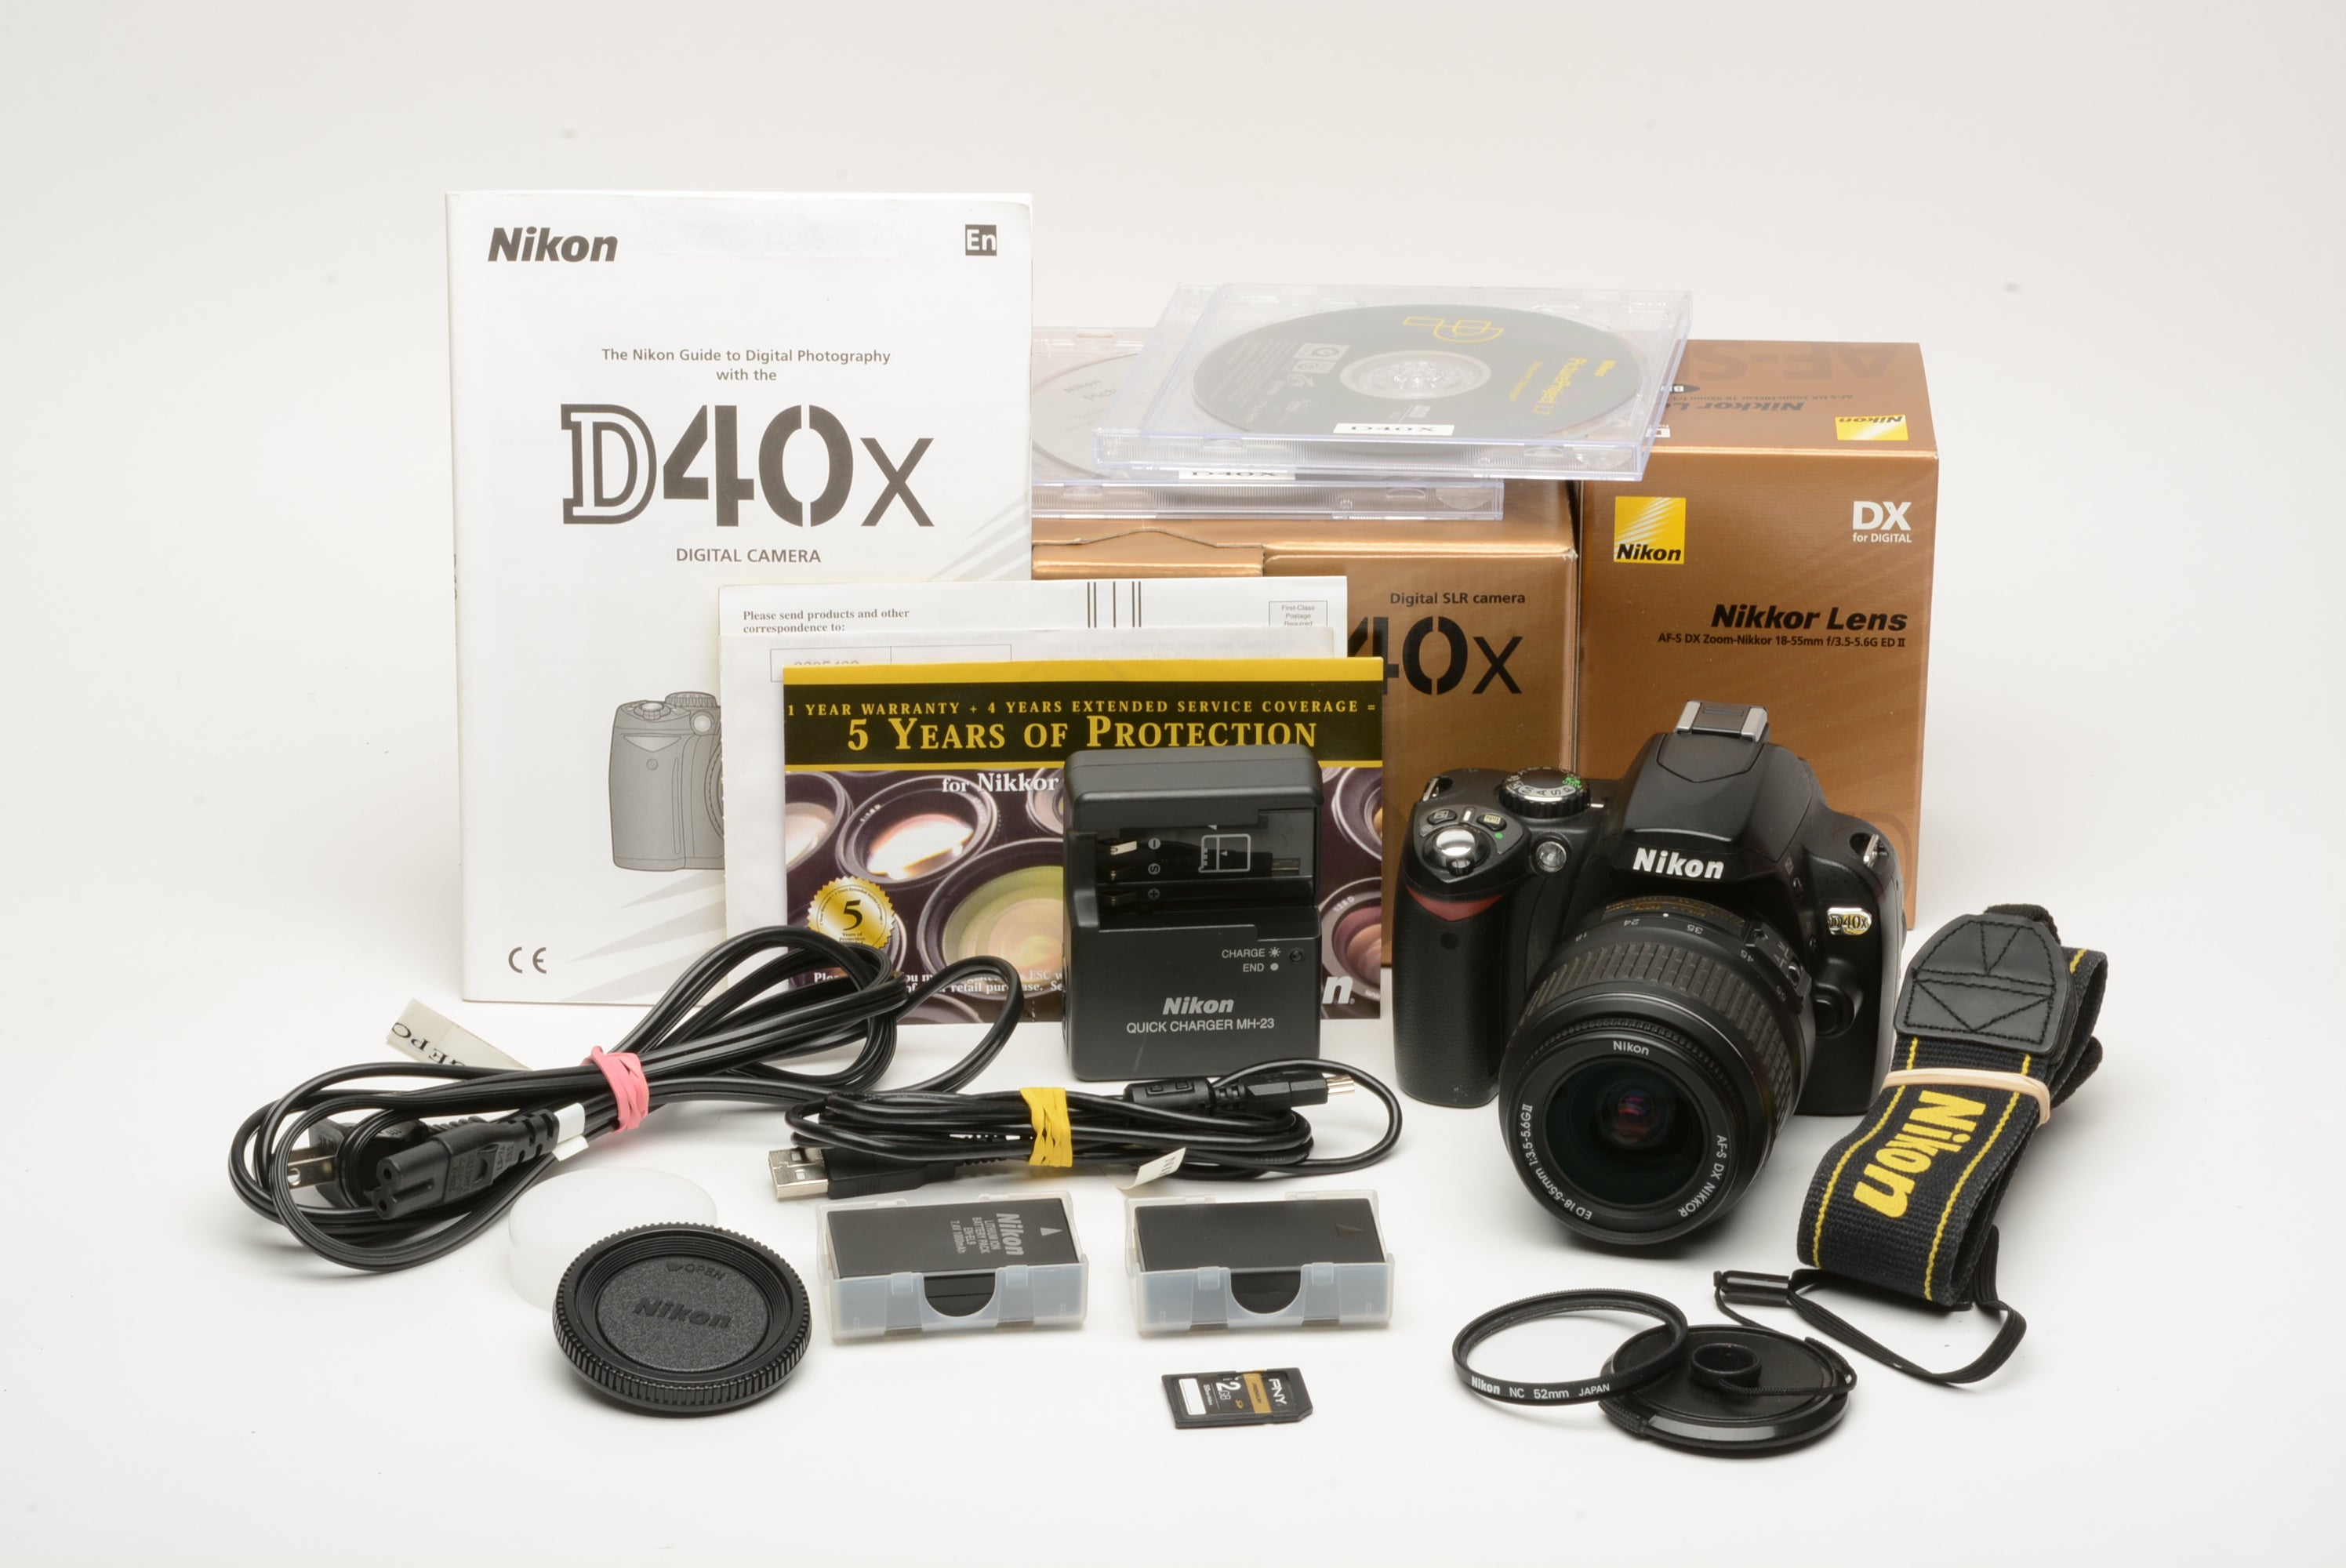 Nikon D40X body w/Nikkor 18-55mm f3.5-5.6 G ED II, Boxed, 2batts, Only 12K  acts